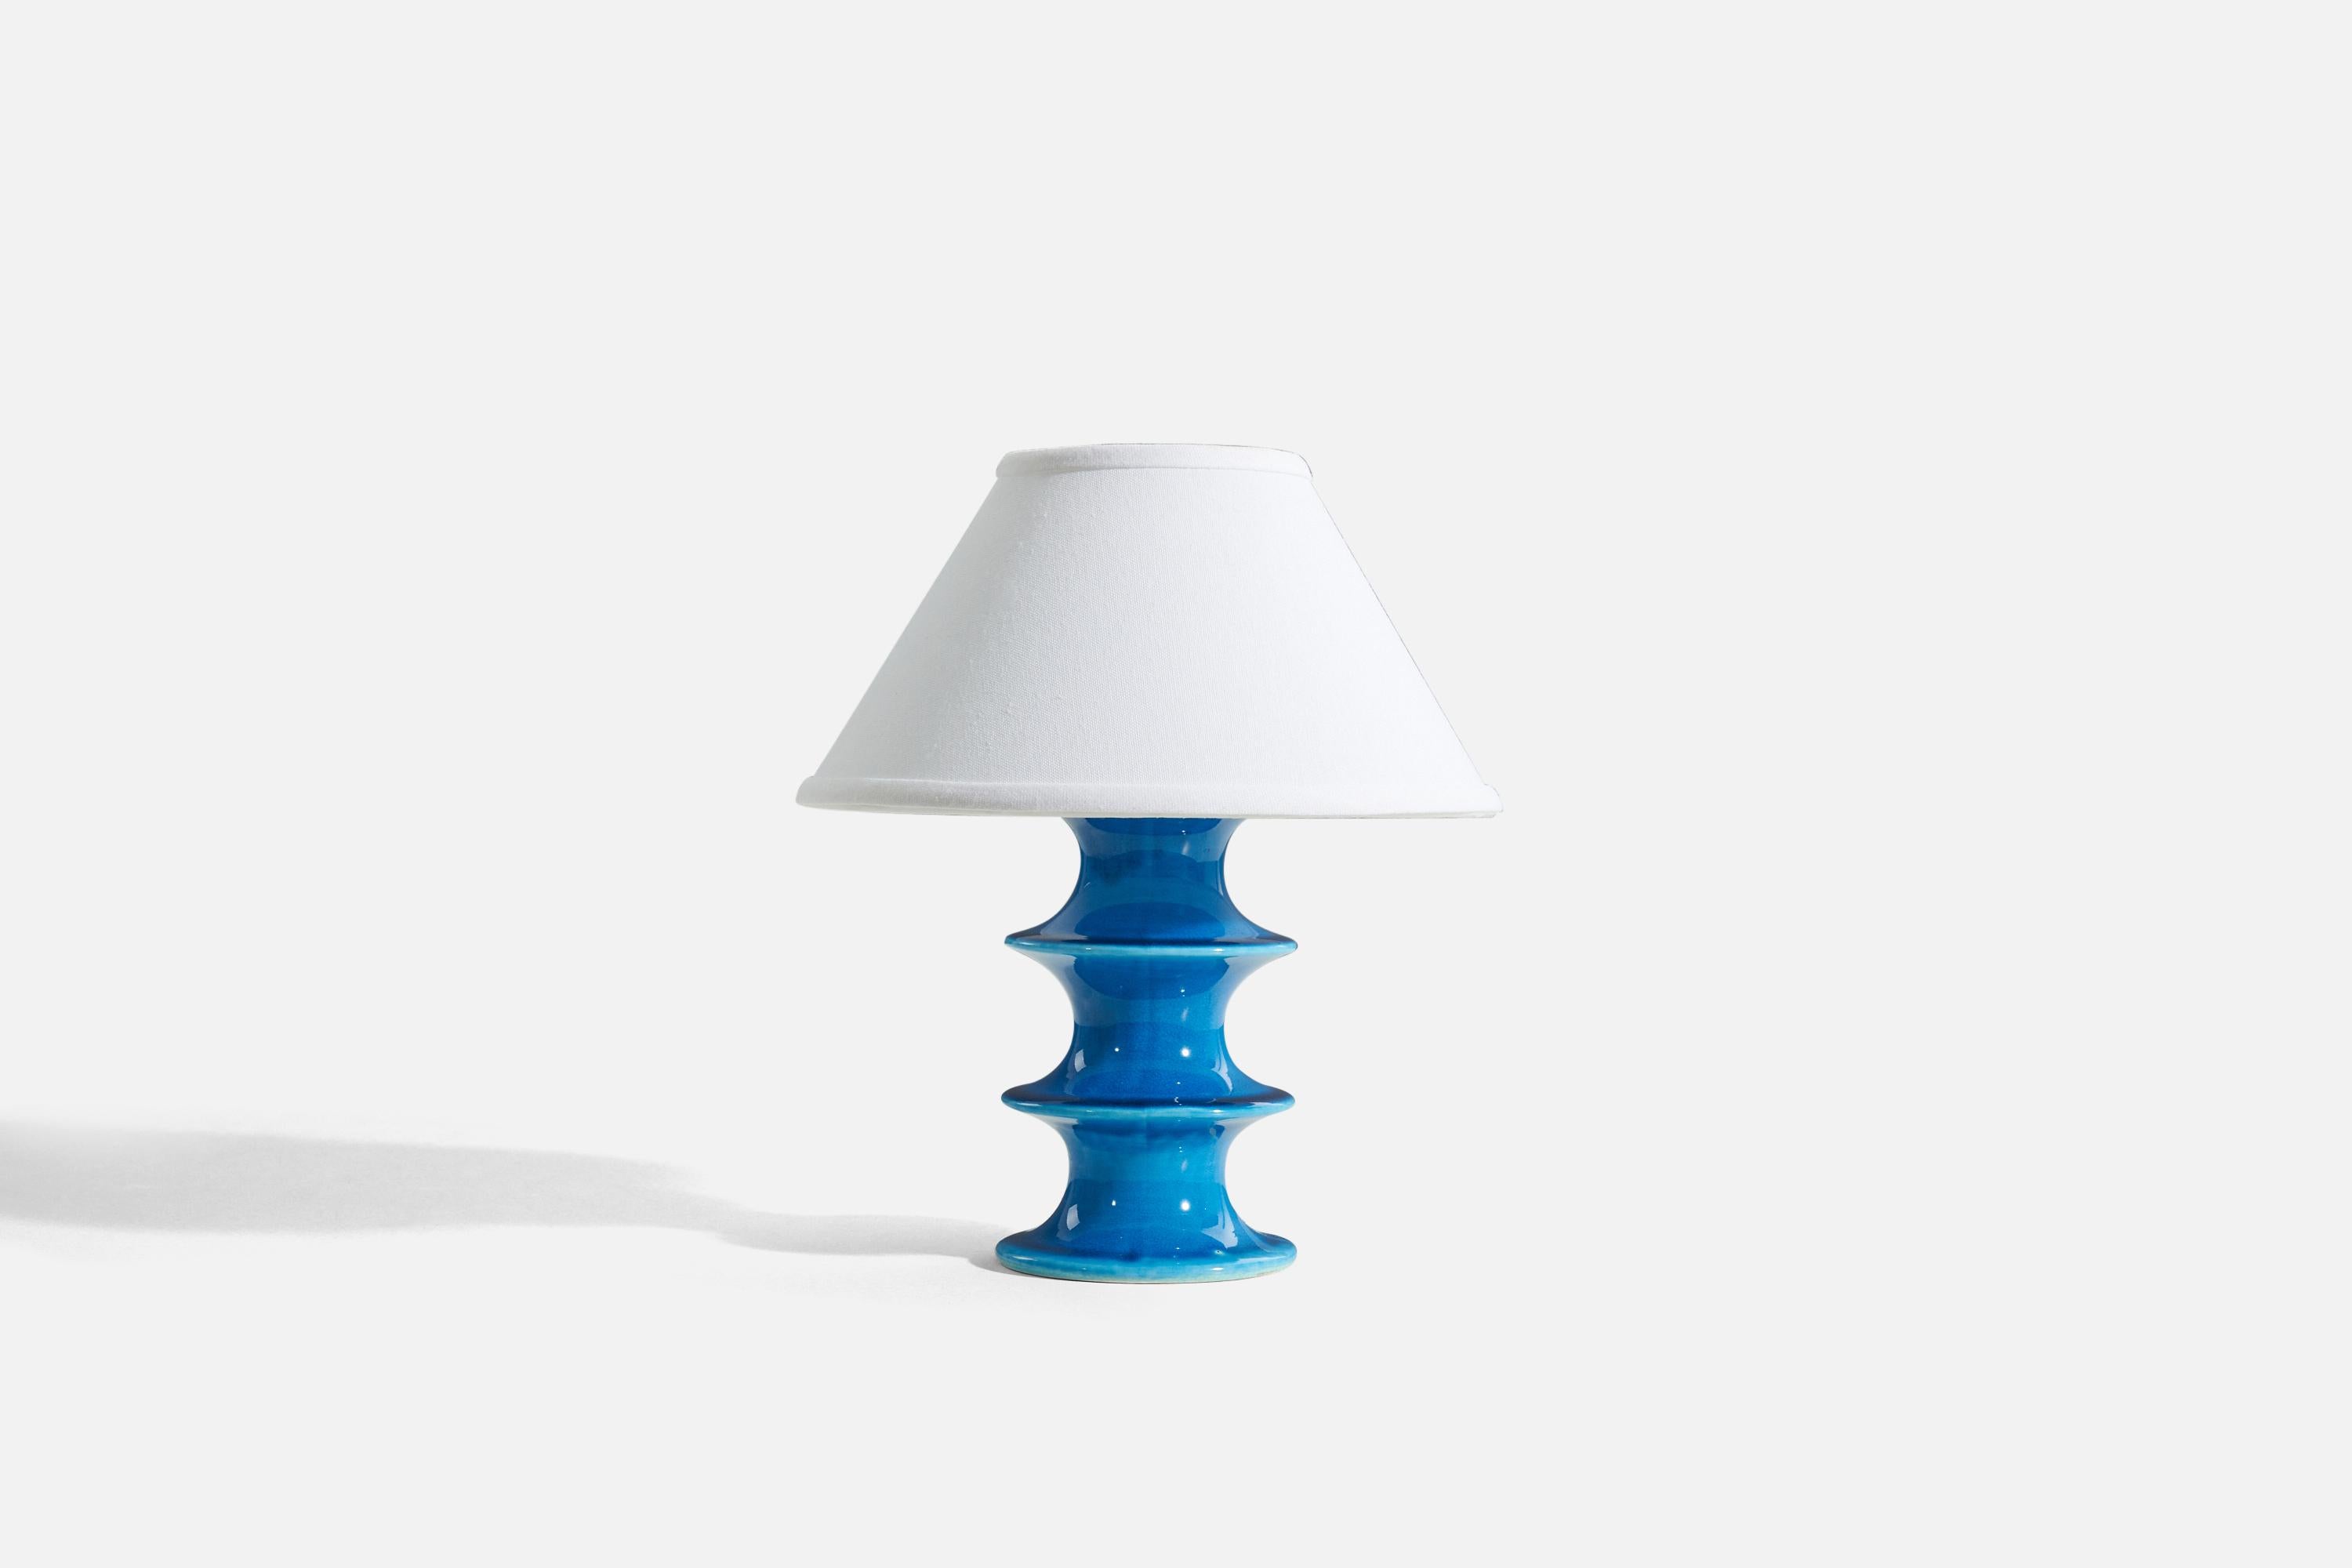 A blue glazed stoneware table lamp designed by Inger Persson, produced by Rörstrand, Sweden, 1960s. Marked.

Sold without lampshades.
Dimensions of lamp (inches) : 8.4375 x 4.375 x 4.375 (H x W x D)
Dimensions shade (inches) : 4.5 x 10.25 x